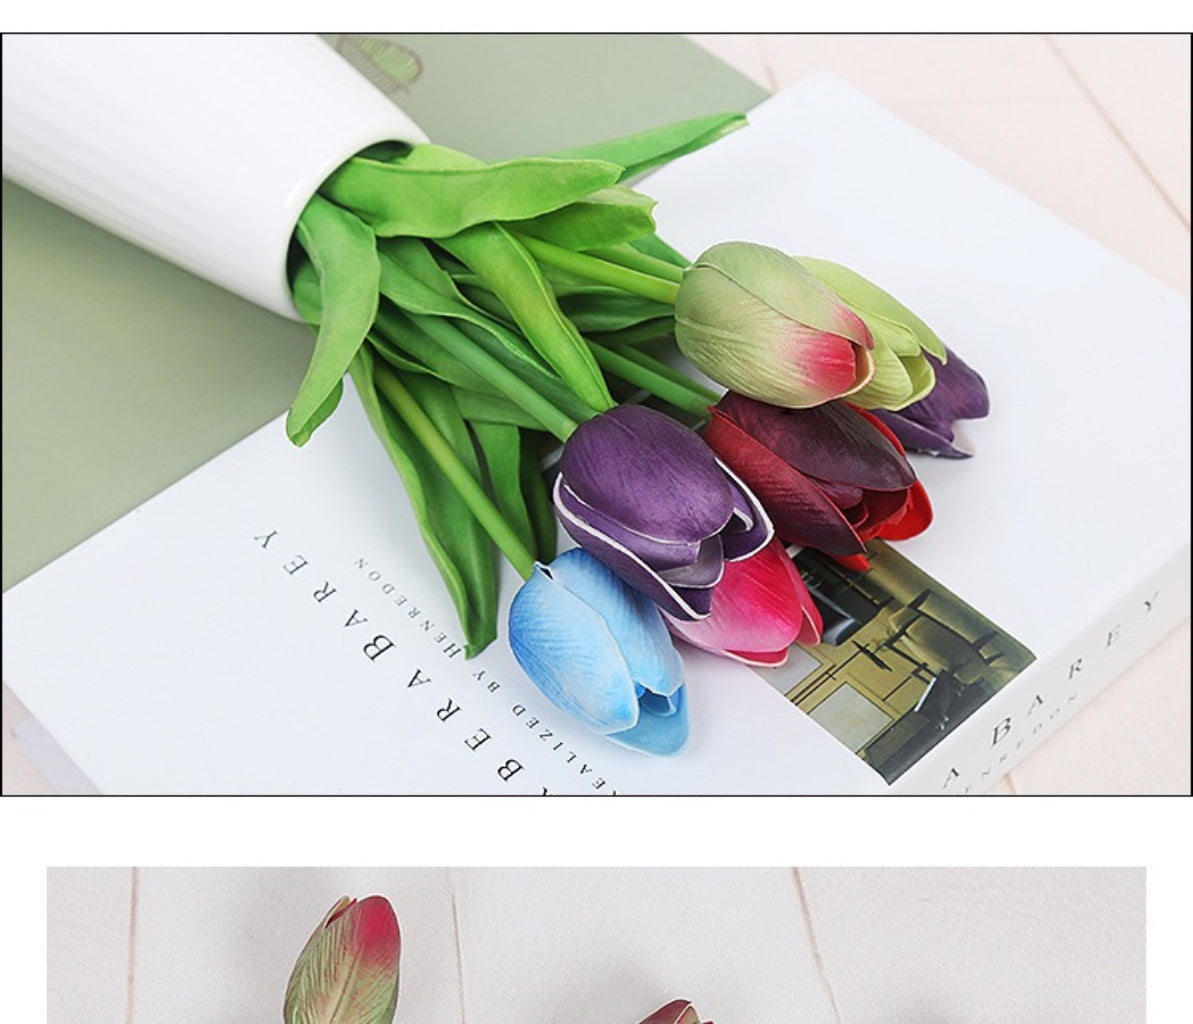 Artificial Tulip Bouquet 10pcs - 12.99 inches PU Tulip Fake Flower Decoration, Suitable for Room, Office Table, Party, Wedding, Home Decoration; Available in a Variety of Colors